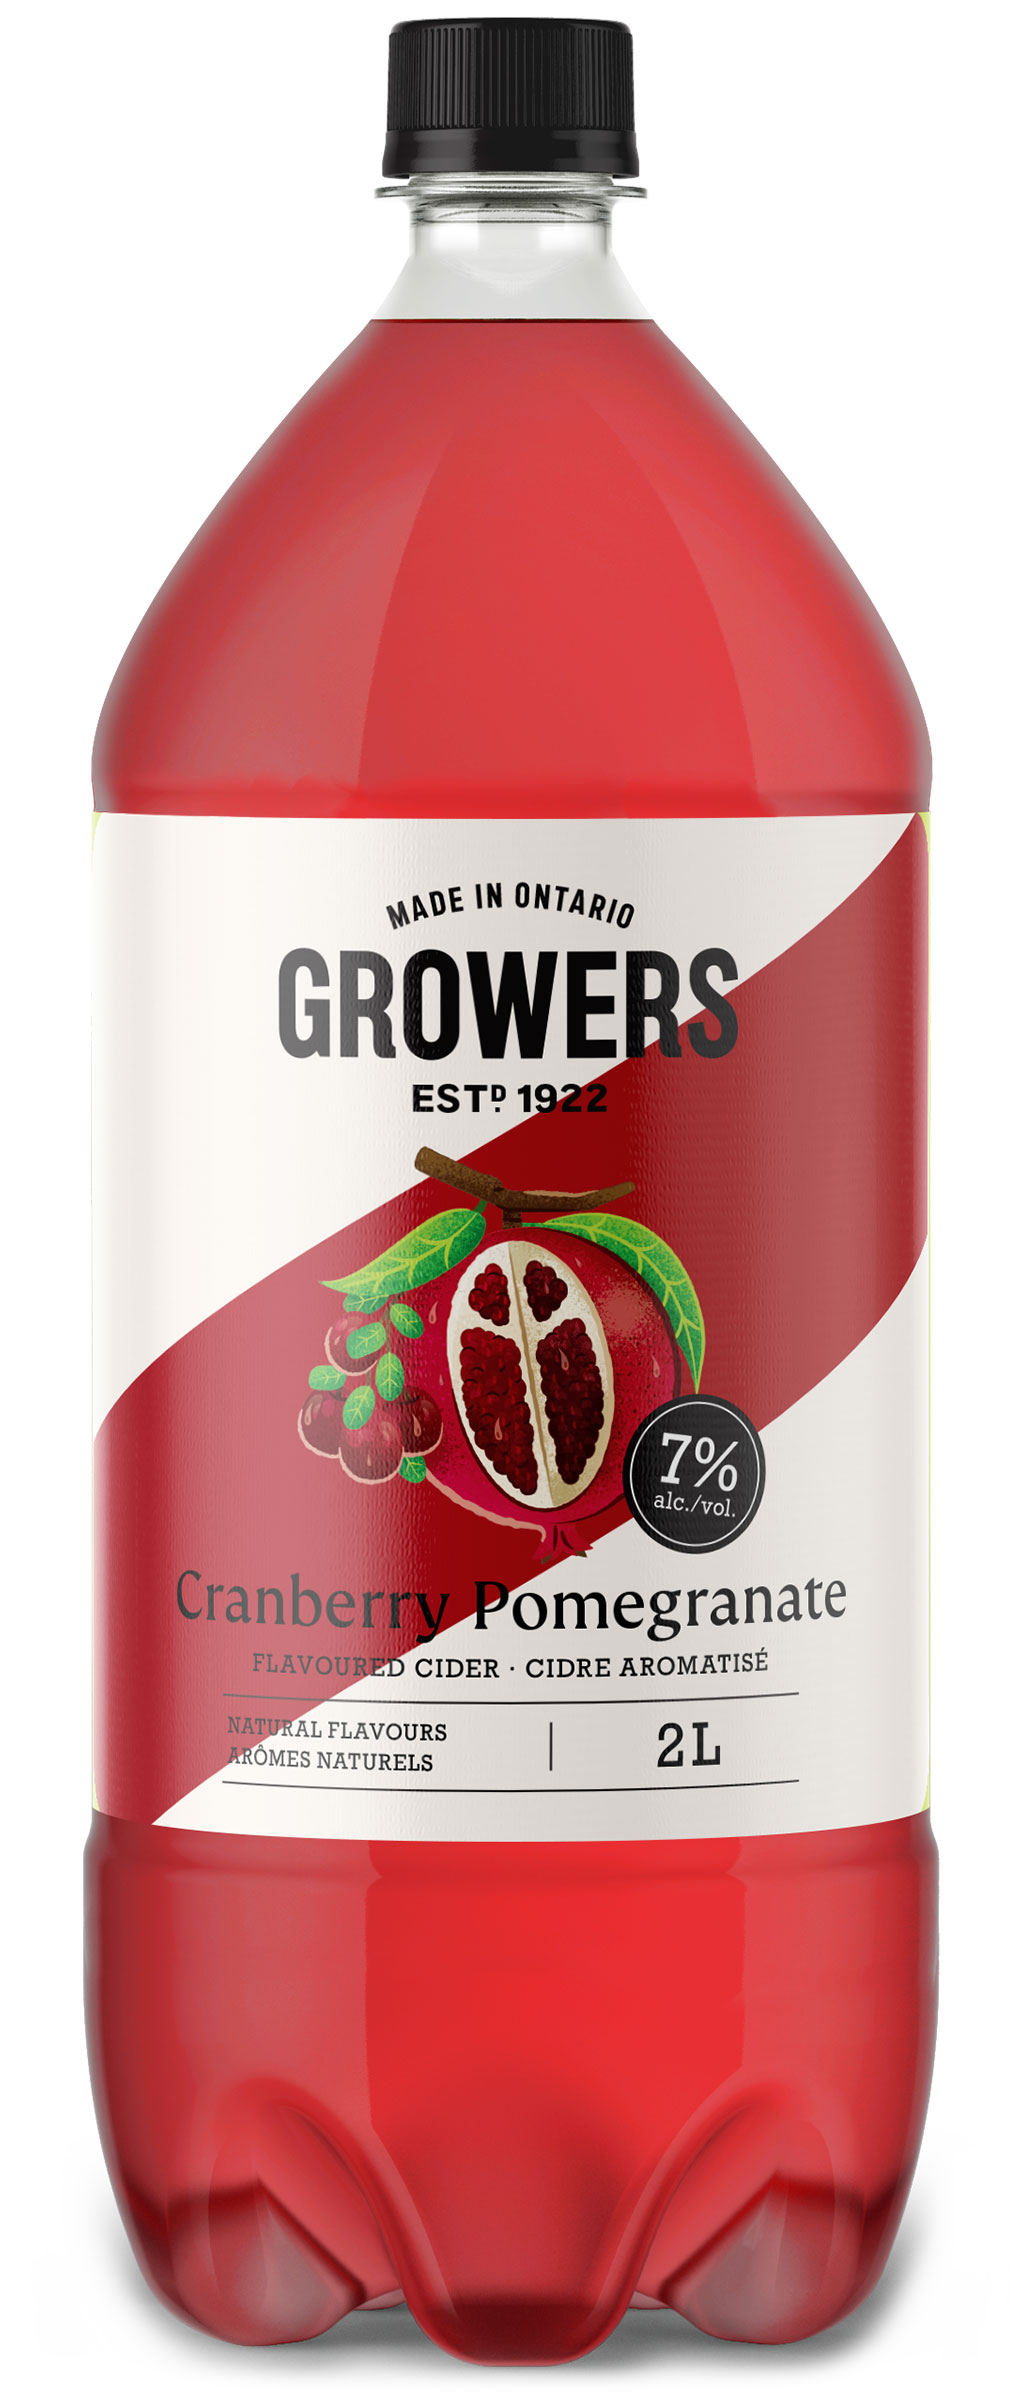 Bottle of Cranberry Pomegranate Growers cider